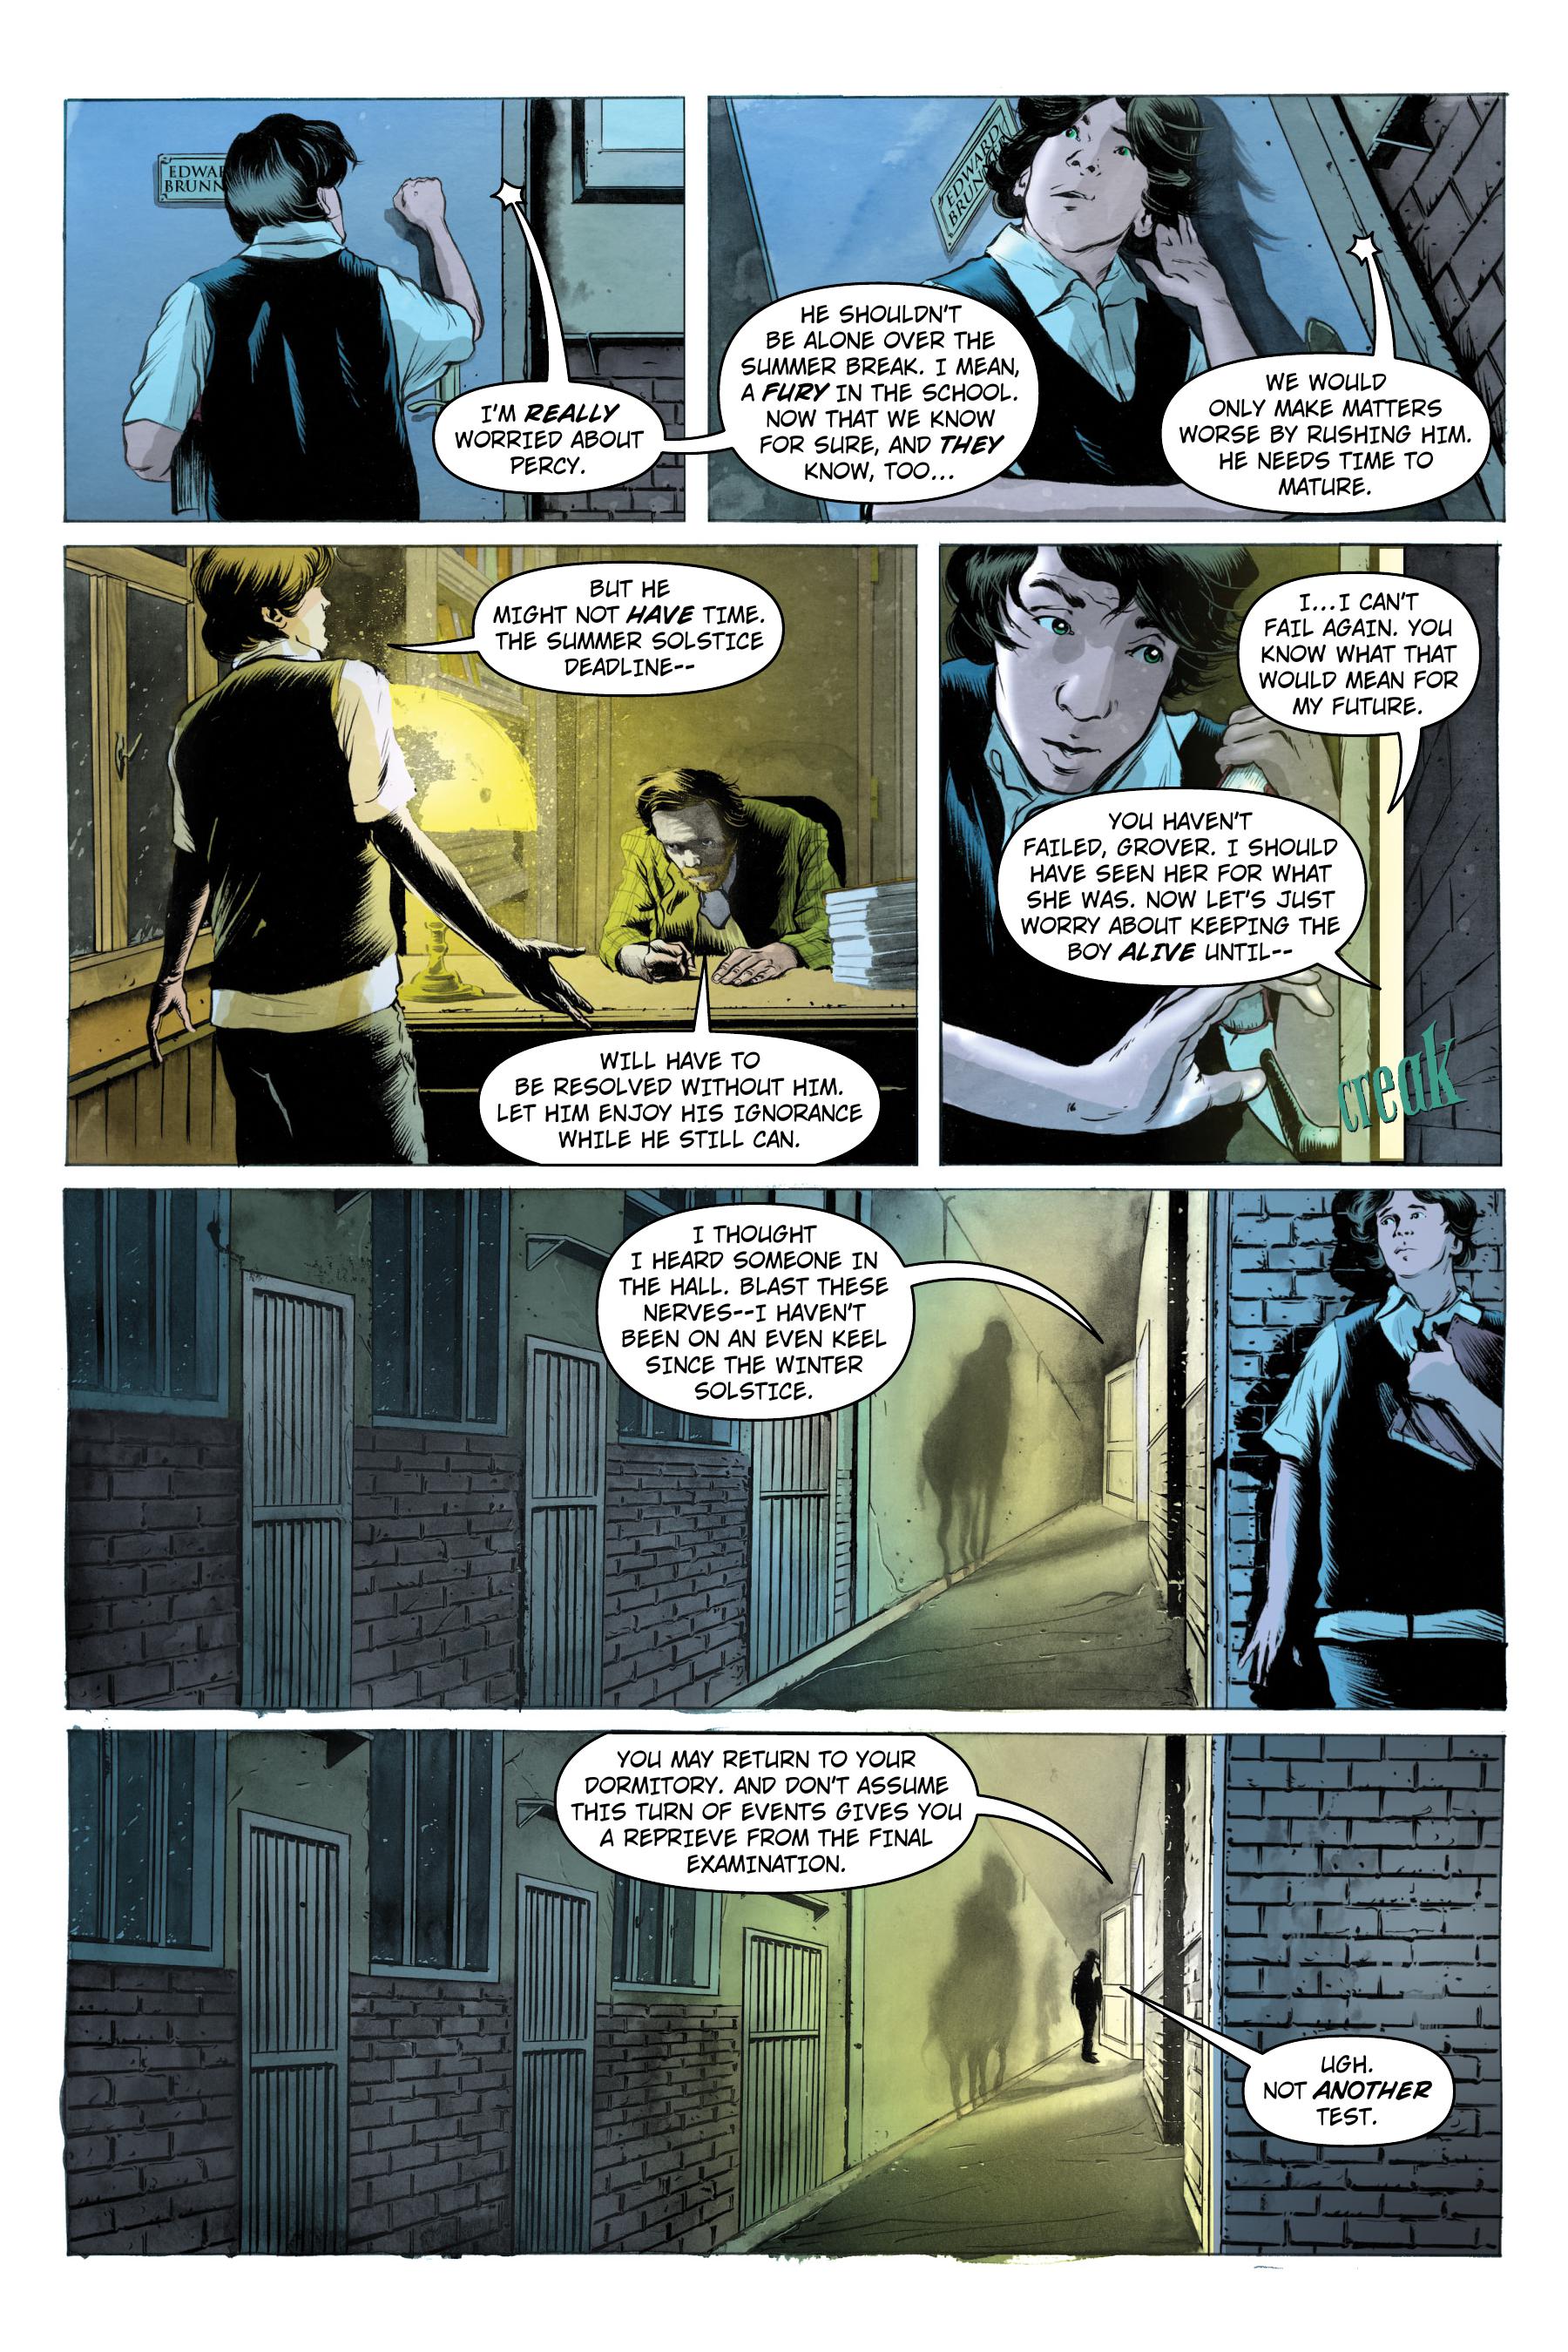 Read online Percy Jackson and the Olympians comic -  Issue # TBP 1 - 11